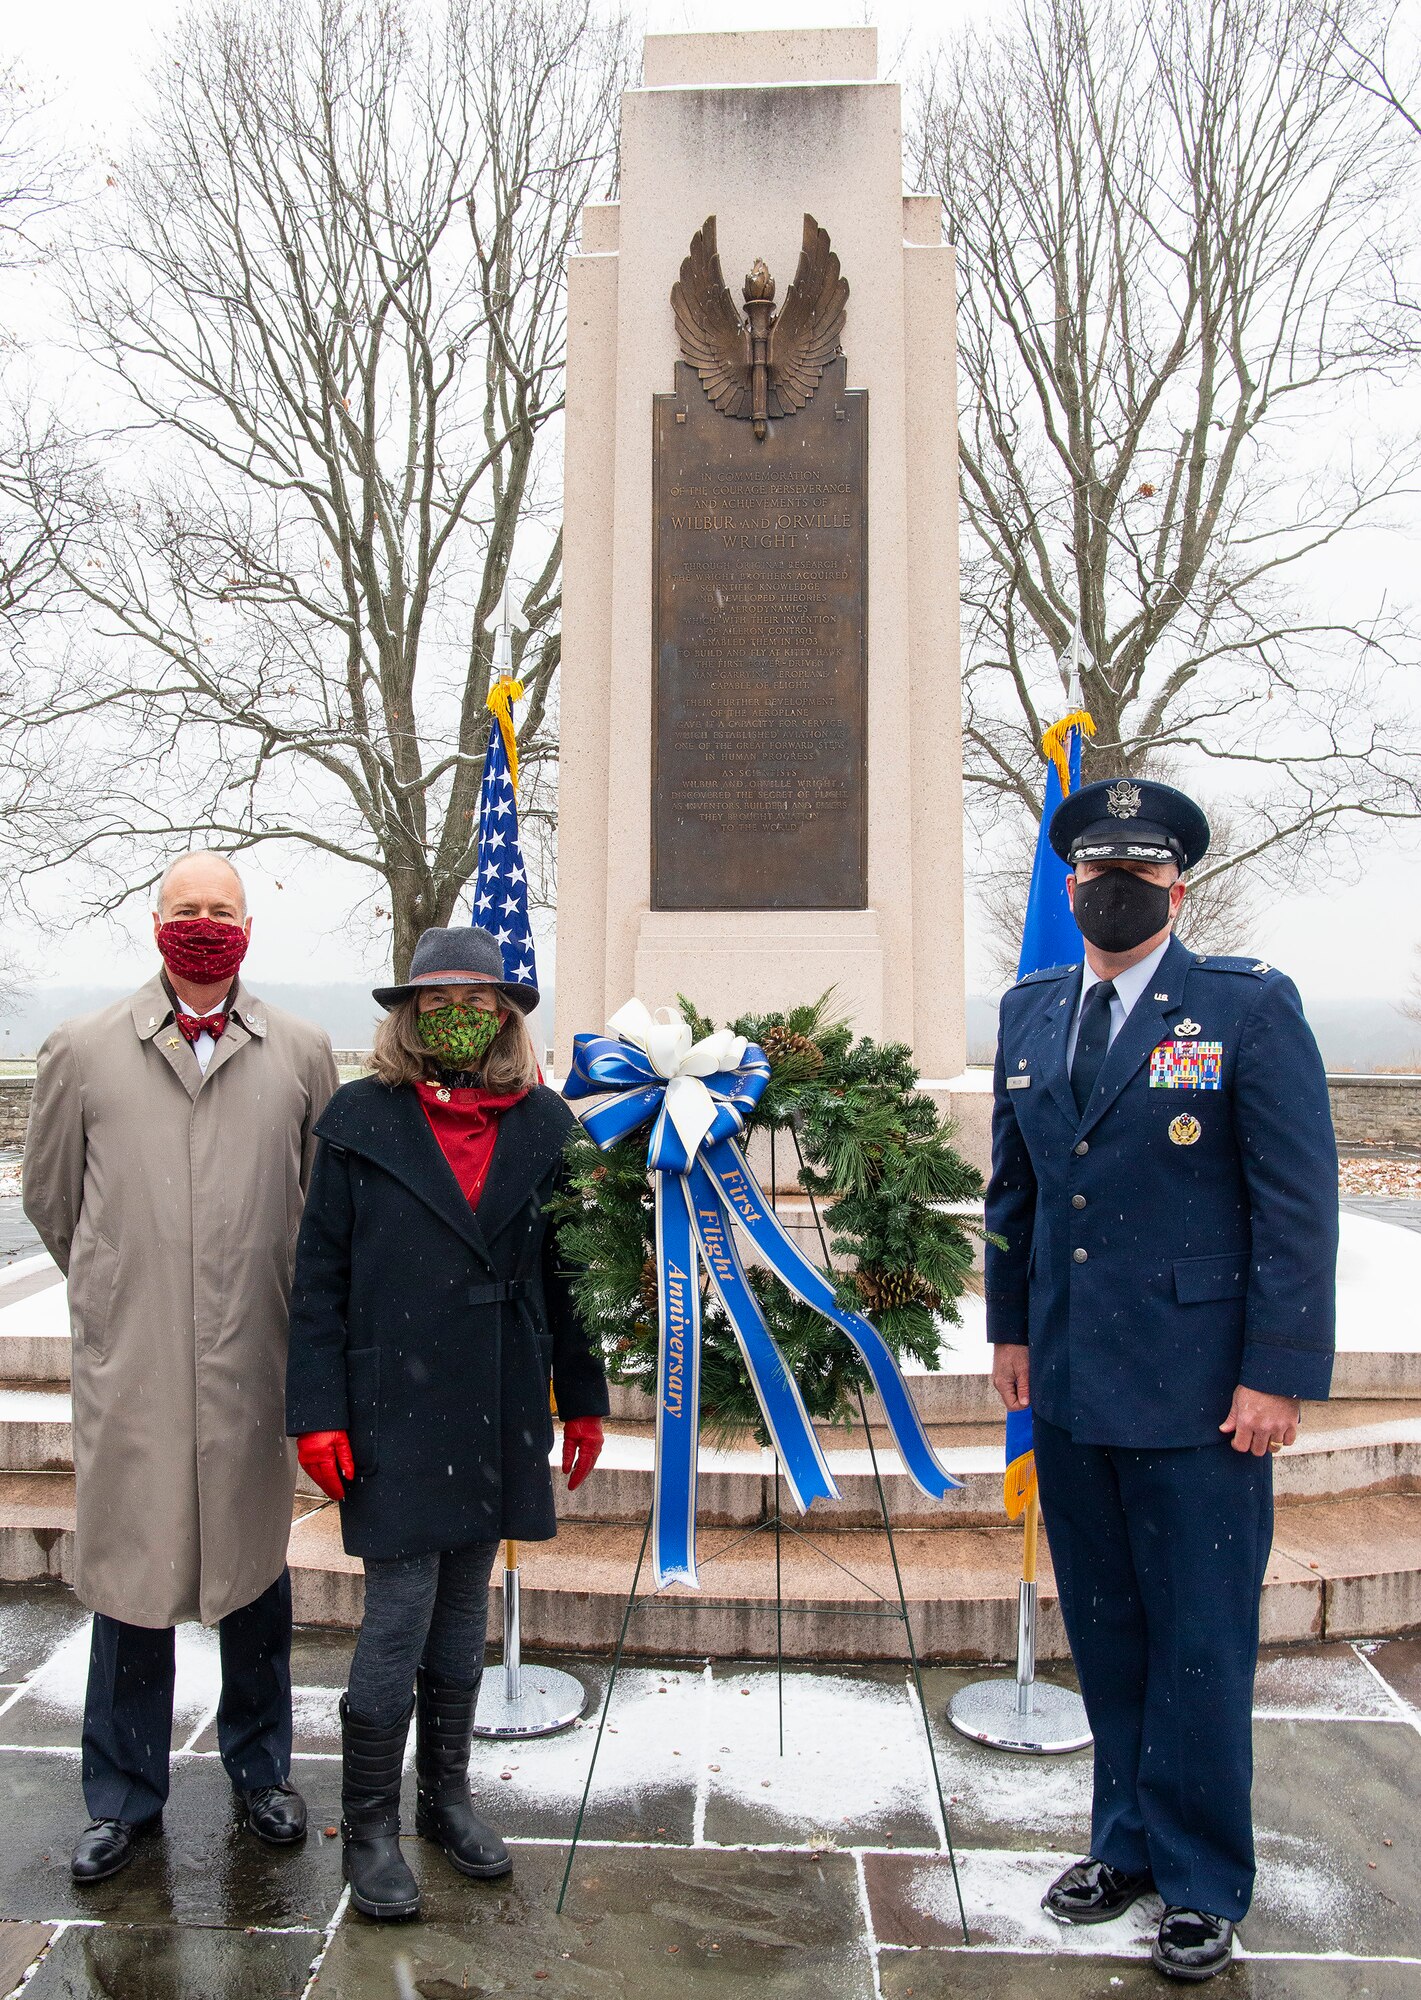 Amanda Wright Lane and Stephen Wright, great-grandniece and grandnephew of the Wright brothers, and Col. Patrick Miller, 88th Air Base Wing and installation commander, lay a wreath at the Wright Brothers Memorial Dec. 17, 2020, during the annual anniversary of the first flight ceremony held on Wright-Patterson Air Force Base, Ohio. The memorial overlooks Huffman Prairie where the Wright Brothers taught themselves and others how to fly. (U.S. Air Force photo by R.J. Oriez)